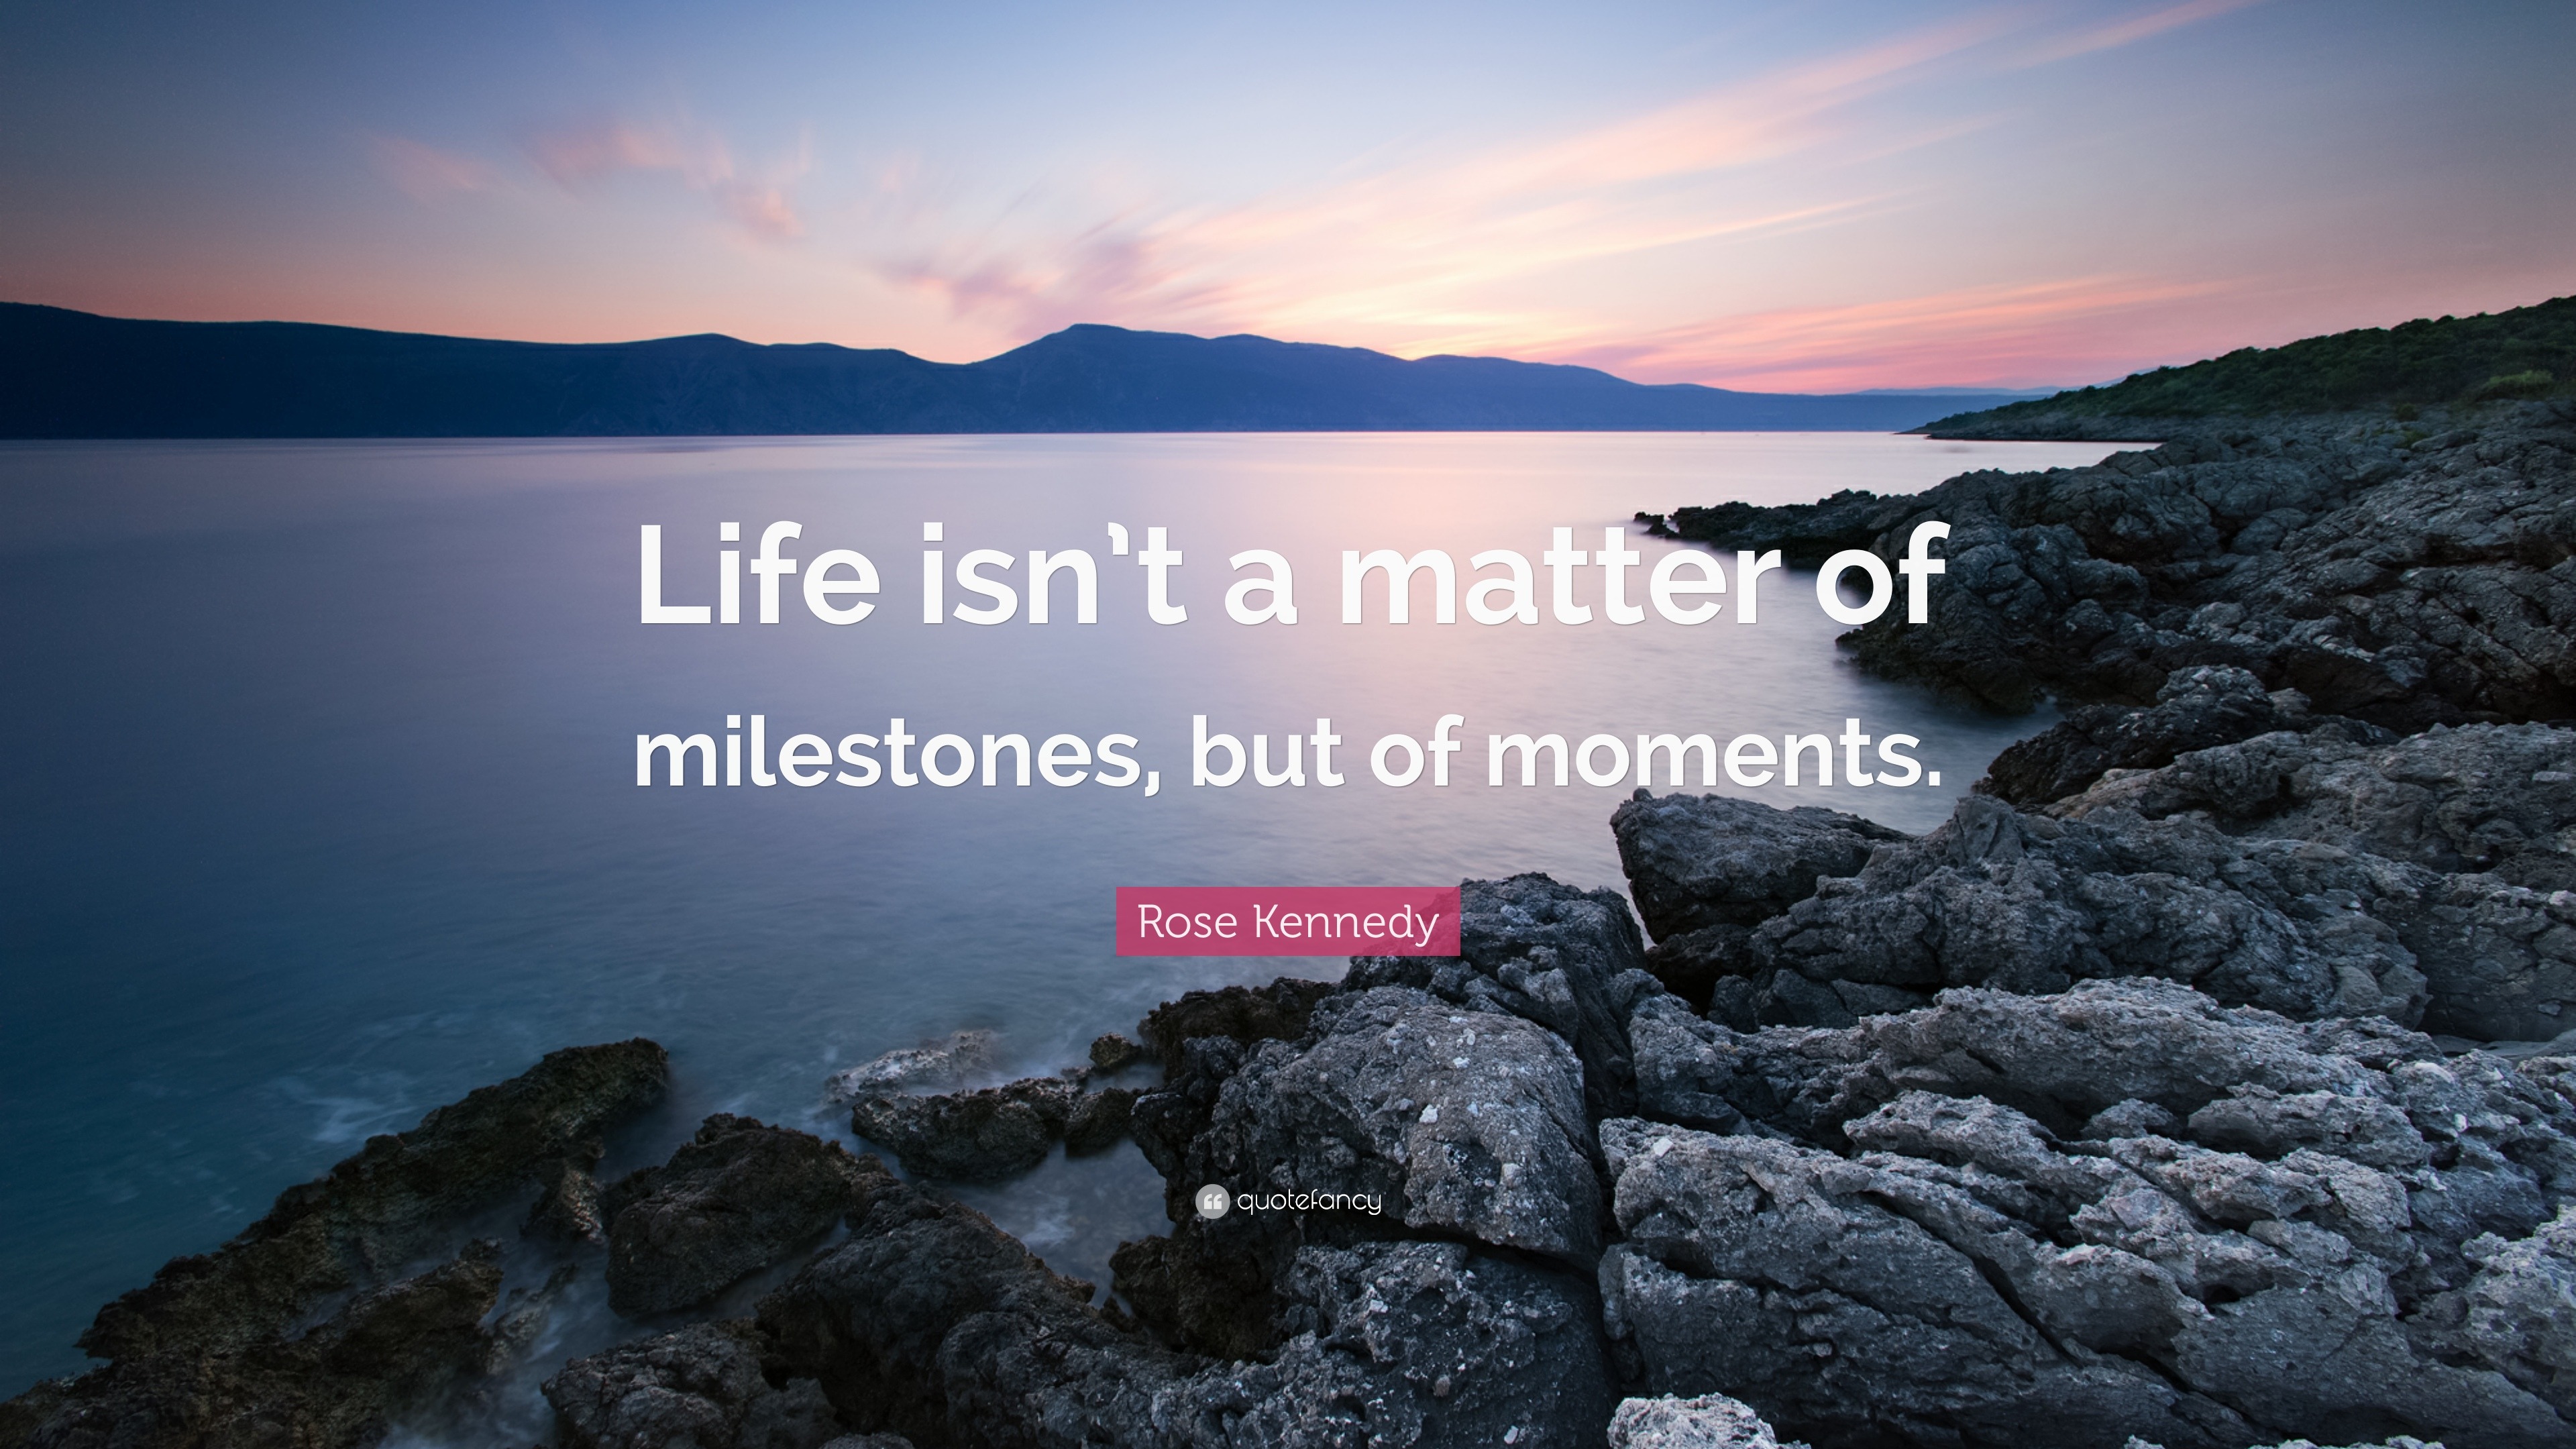 Rose Kennedy Quote “Life isn t a matter of milestones but of